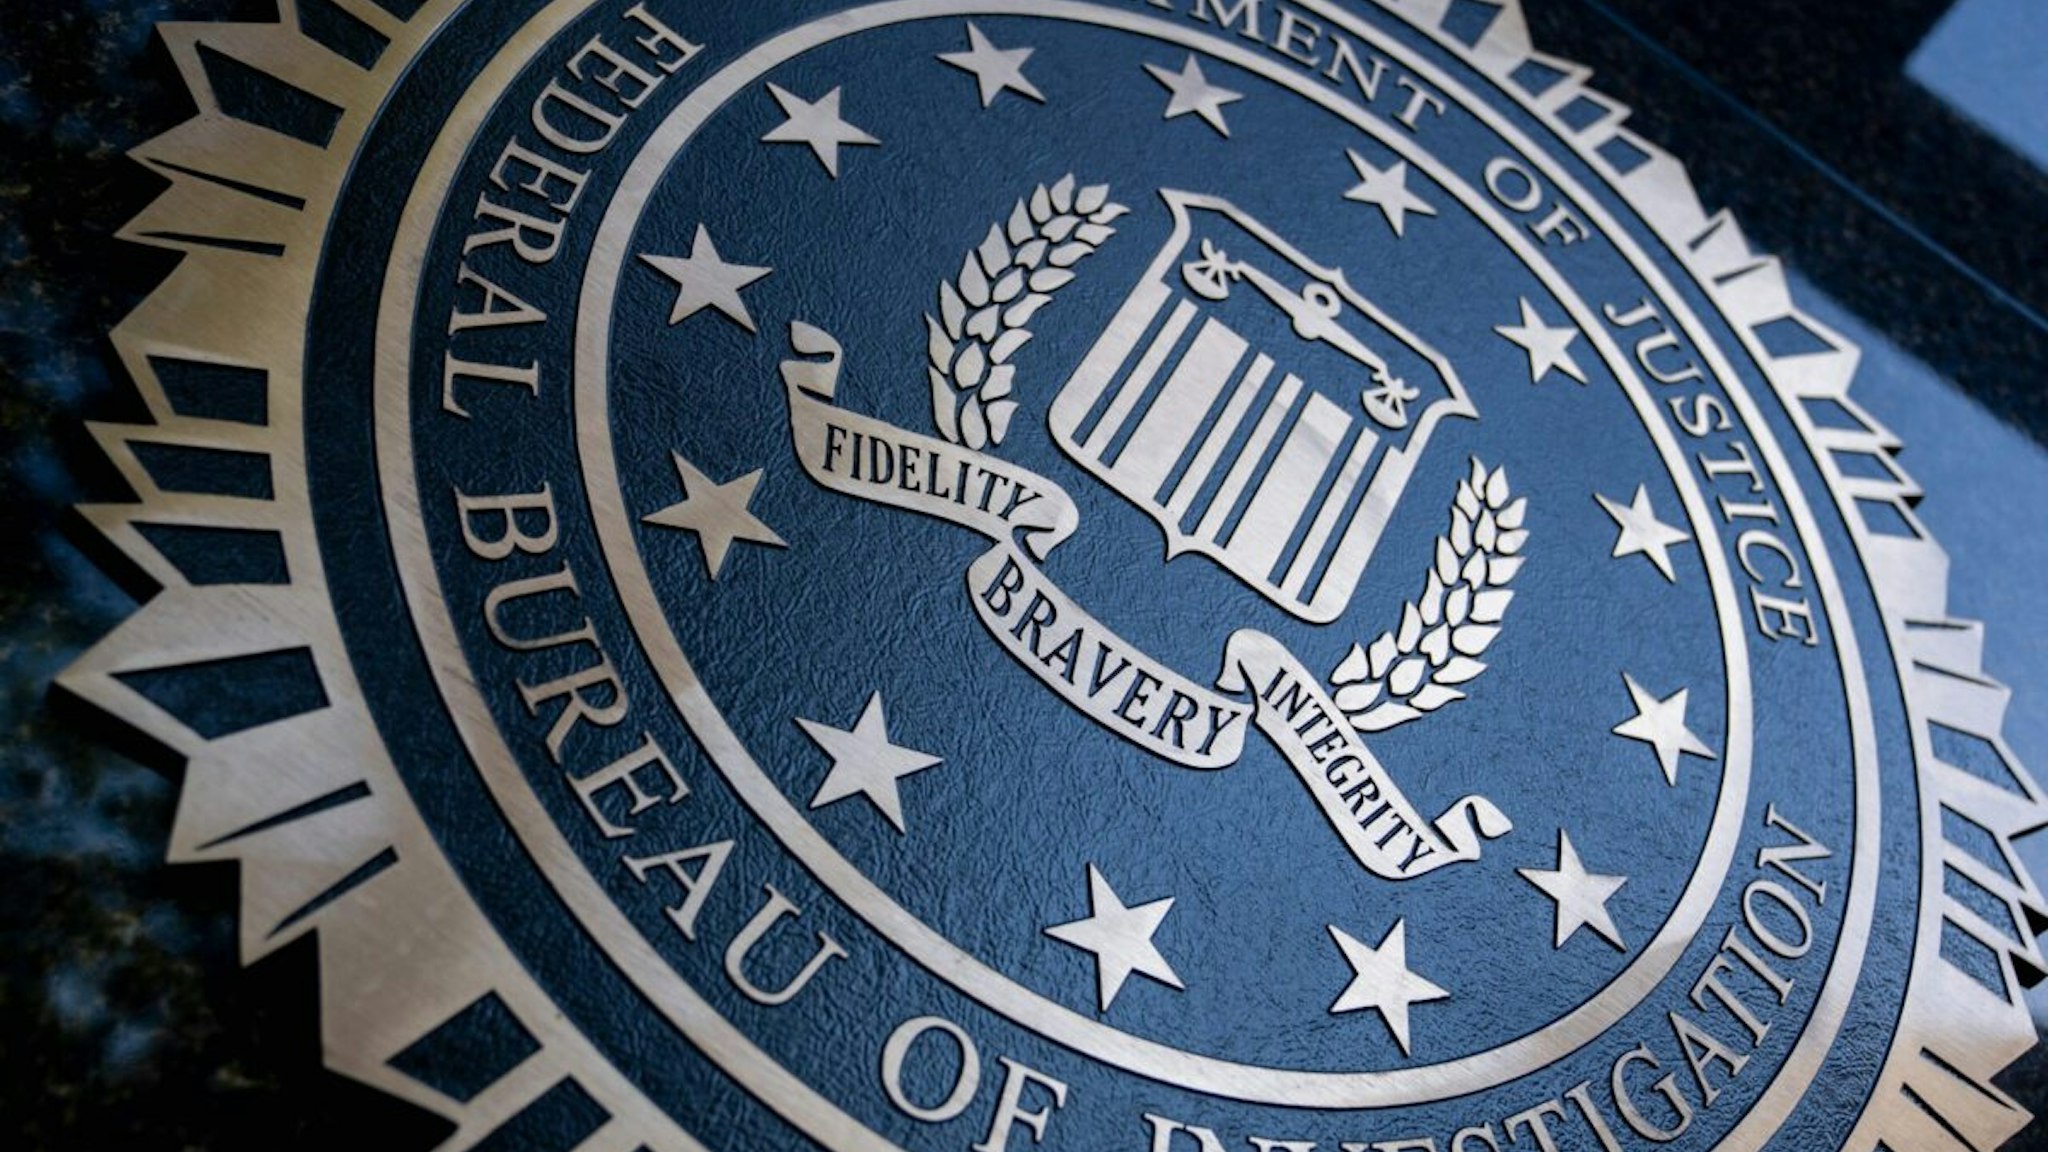 A seal reading "Department of Justice Federal Bureau of Investigation" is displayed on the J. Edgar Hoover FBI building in Washington, DC, o August 9, 2022